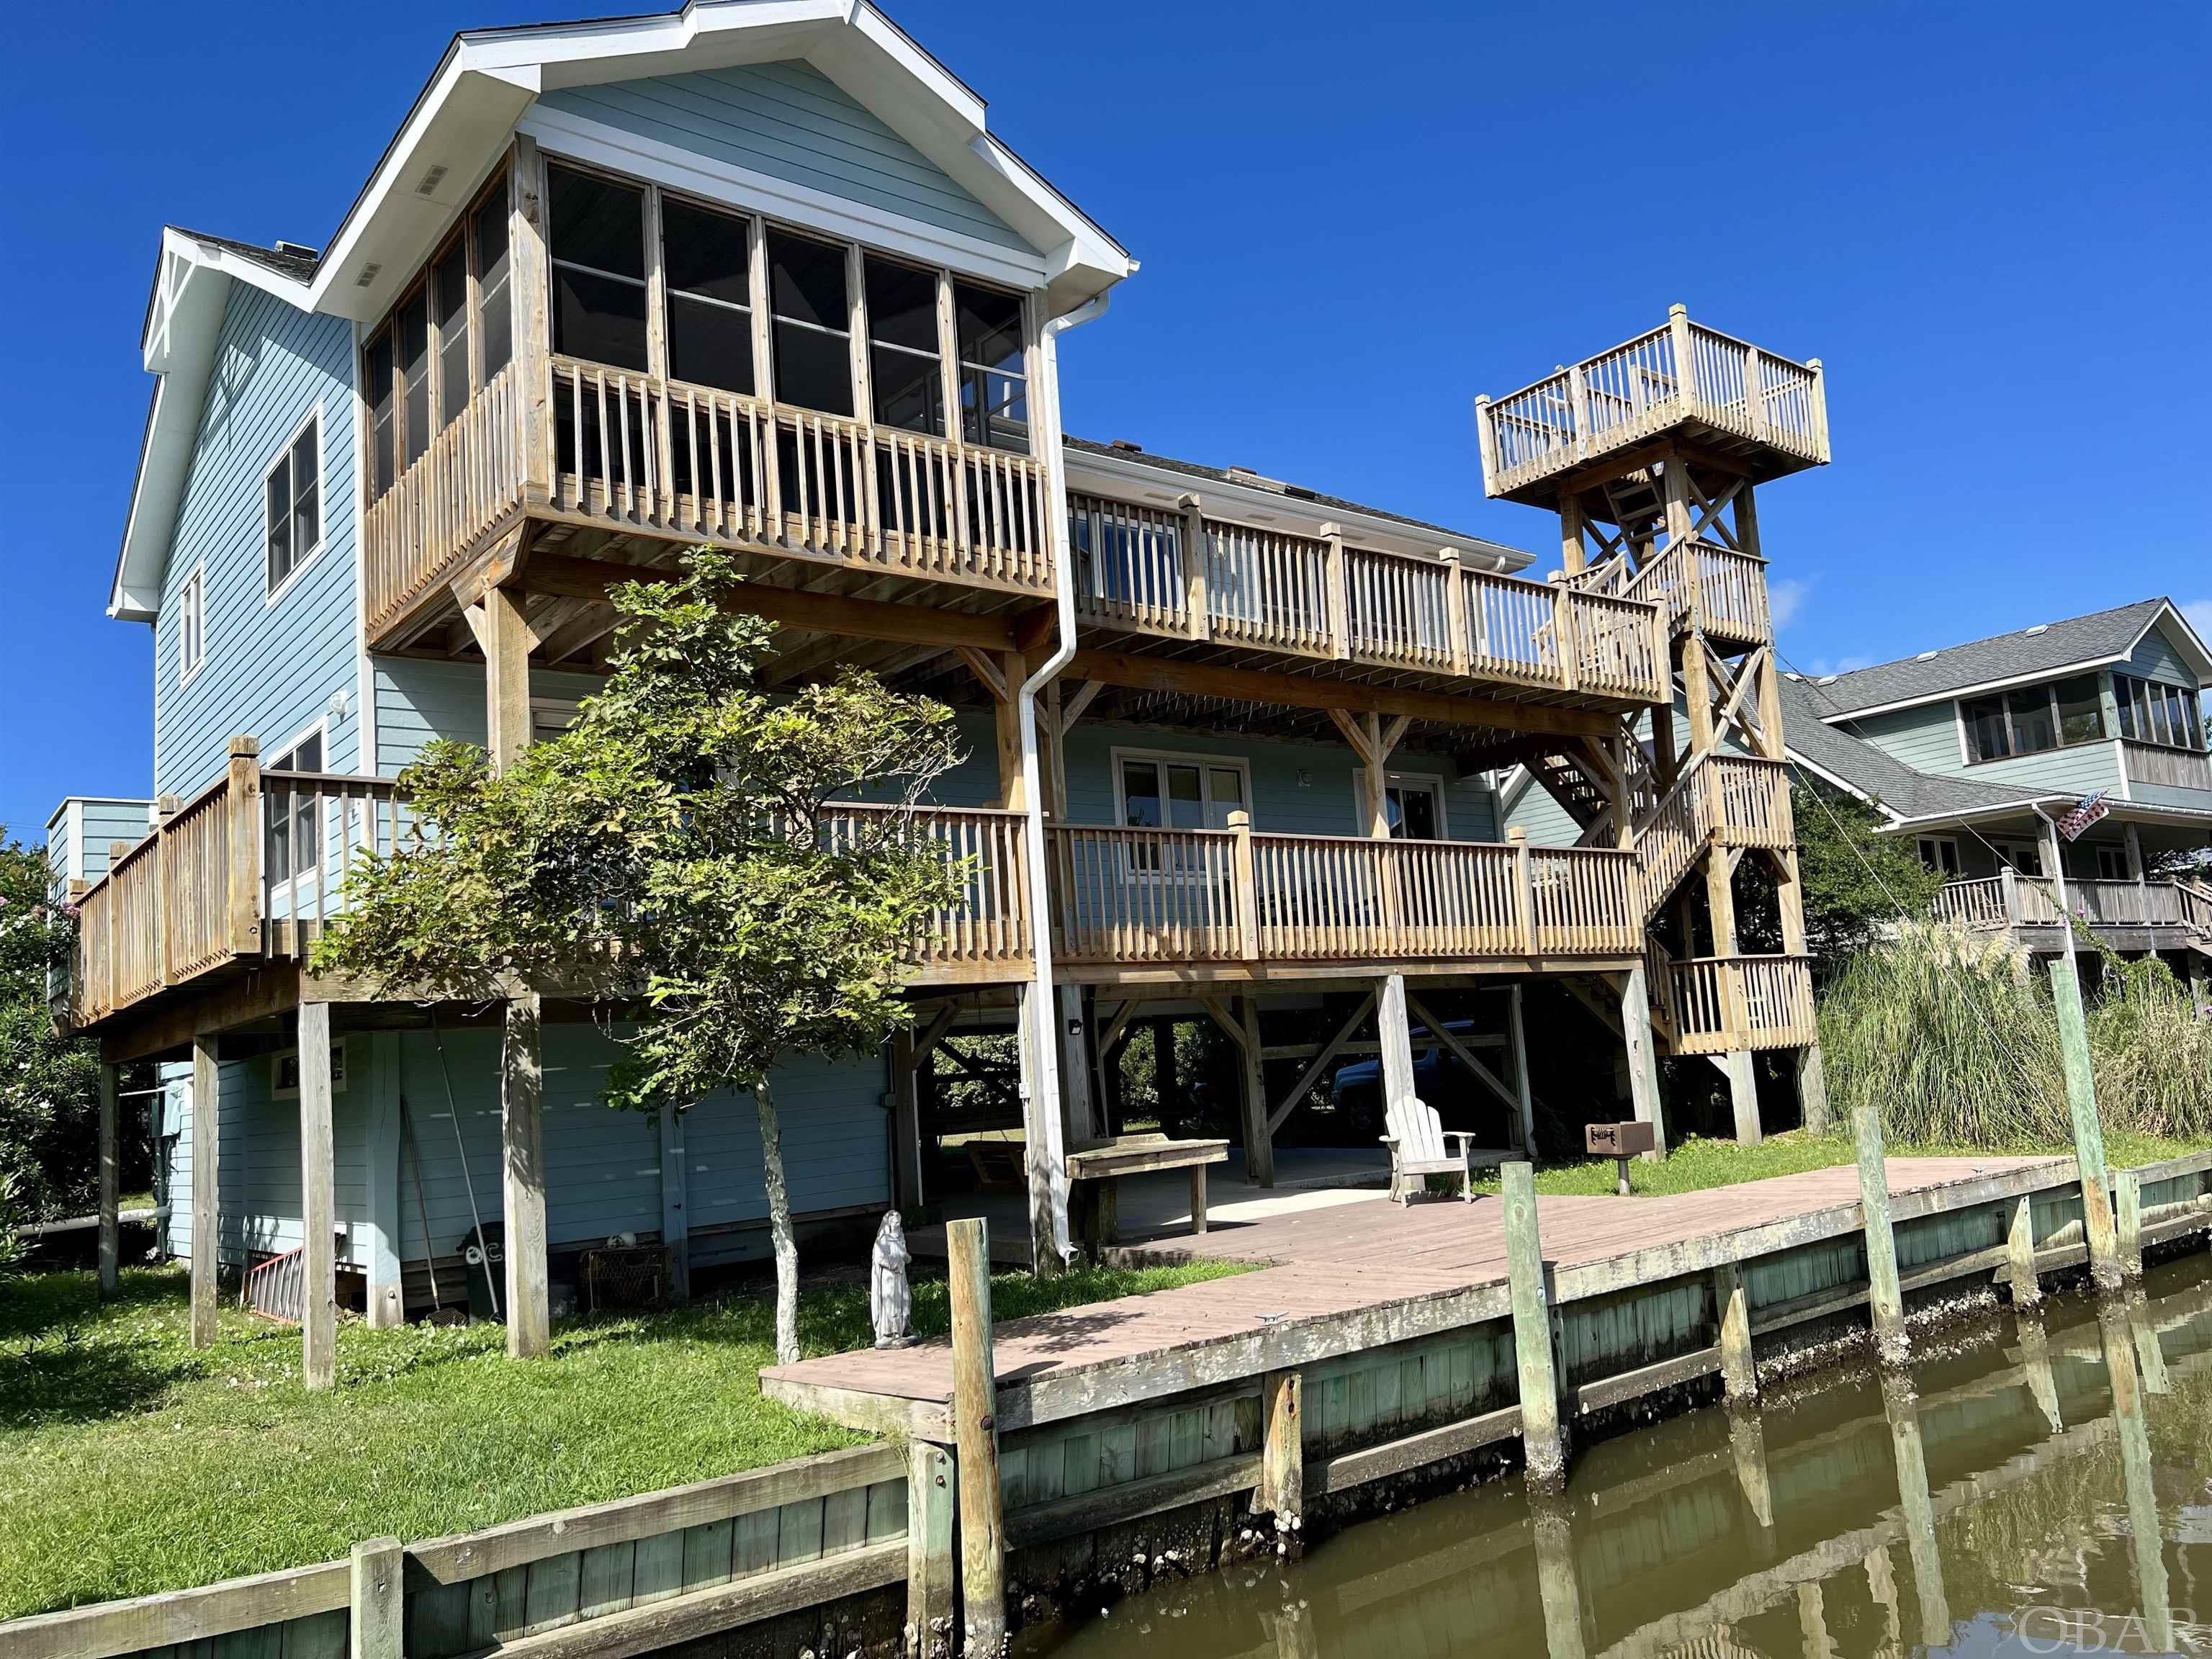 This custom built home ticks all the boxes for your perfect island retreat!  Located at the base of a canal providing deep water dockage and spectacular views extending out and over Pamlico sound.  Multiple two level decks, screened porch and an above roof level observation deck maximize your ability to enjoy this amazing location.  The house is a reverse floor plan with the downstairs containing four bedrooms and two full bathrooms.  Two bedrooms including the master look out over the water, master bath with jetted soaking tub offers same gorgeous view.  Upstairs is a wide open floor plan with cathedral ceiling.  Spacious living area, dining and open kitchen with lots of storage.  The second floor also offers a bonus room/office.  Underneath the house has concrete pad, a single vehicle sized garage as well as a large workshop/storage area.  The house comes equipped with Starlink satellite internet system (subscription transferable) as well a a Telsa HPWC high power charge port and Blink security cams (account transferable).  Sellers have meticulously maintained this property over the years and are including all furnishings making it truly a turn-key property